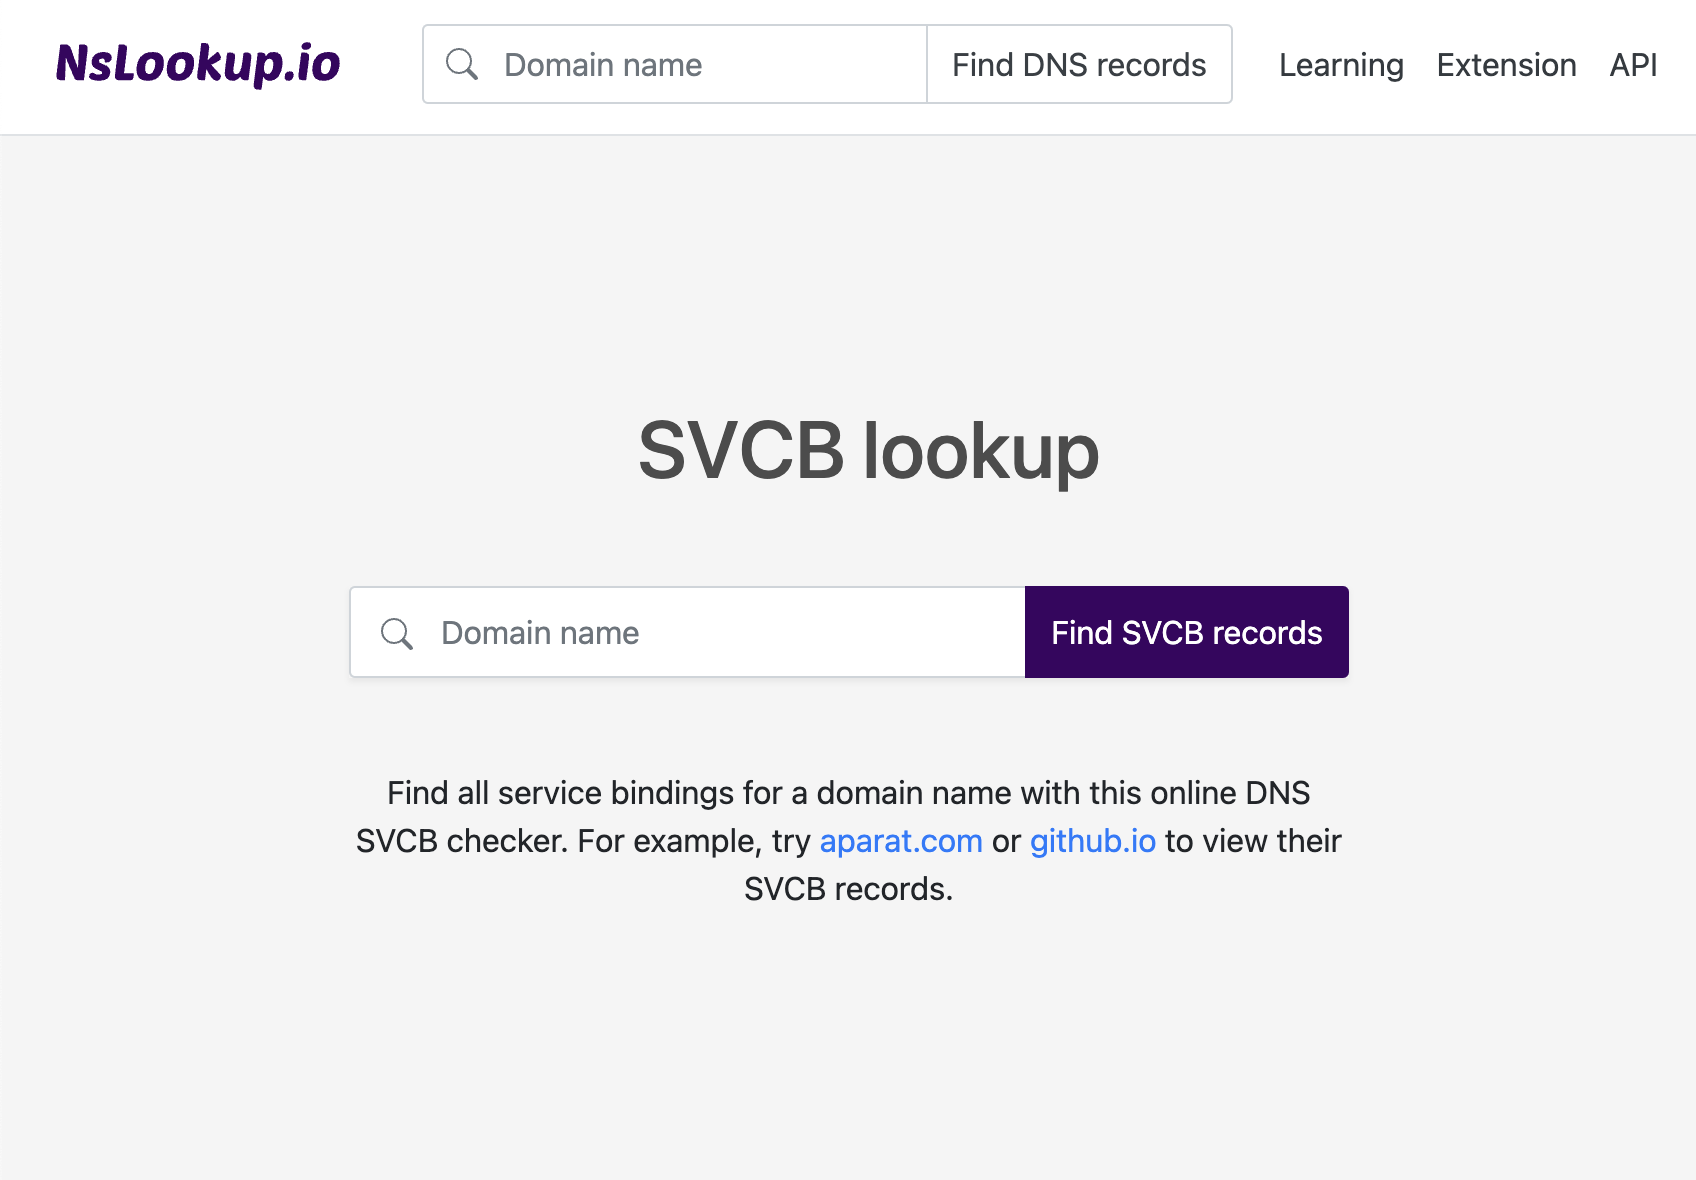 Open the SVCB lookup tool